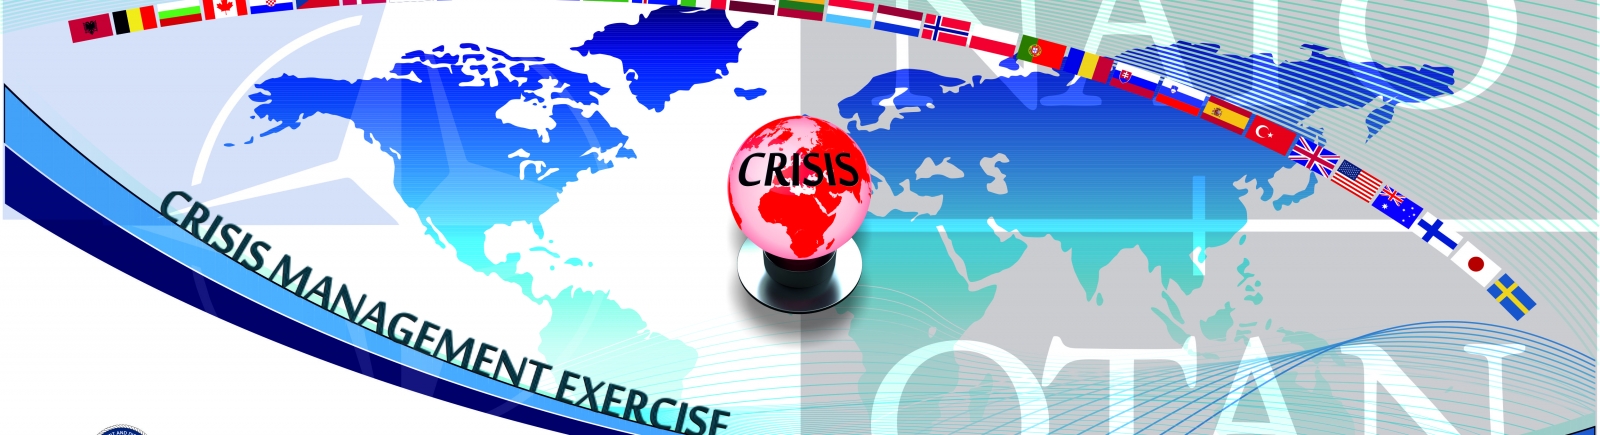 Crisis Management and Disaster Response Course - (NATO APPROVED; NATO ETOC Code: ETE-CM-21784) 